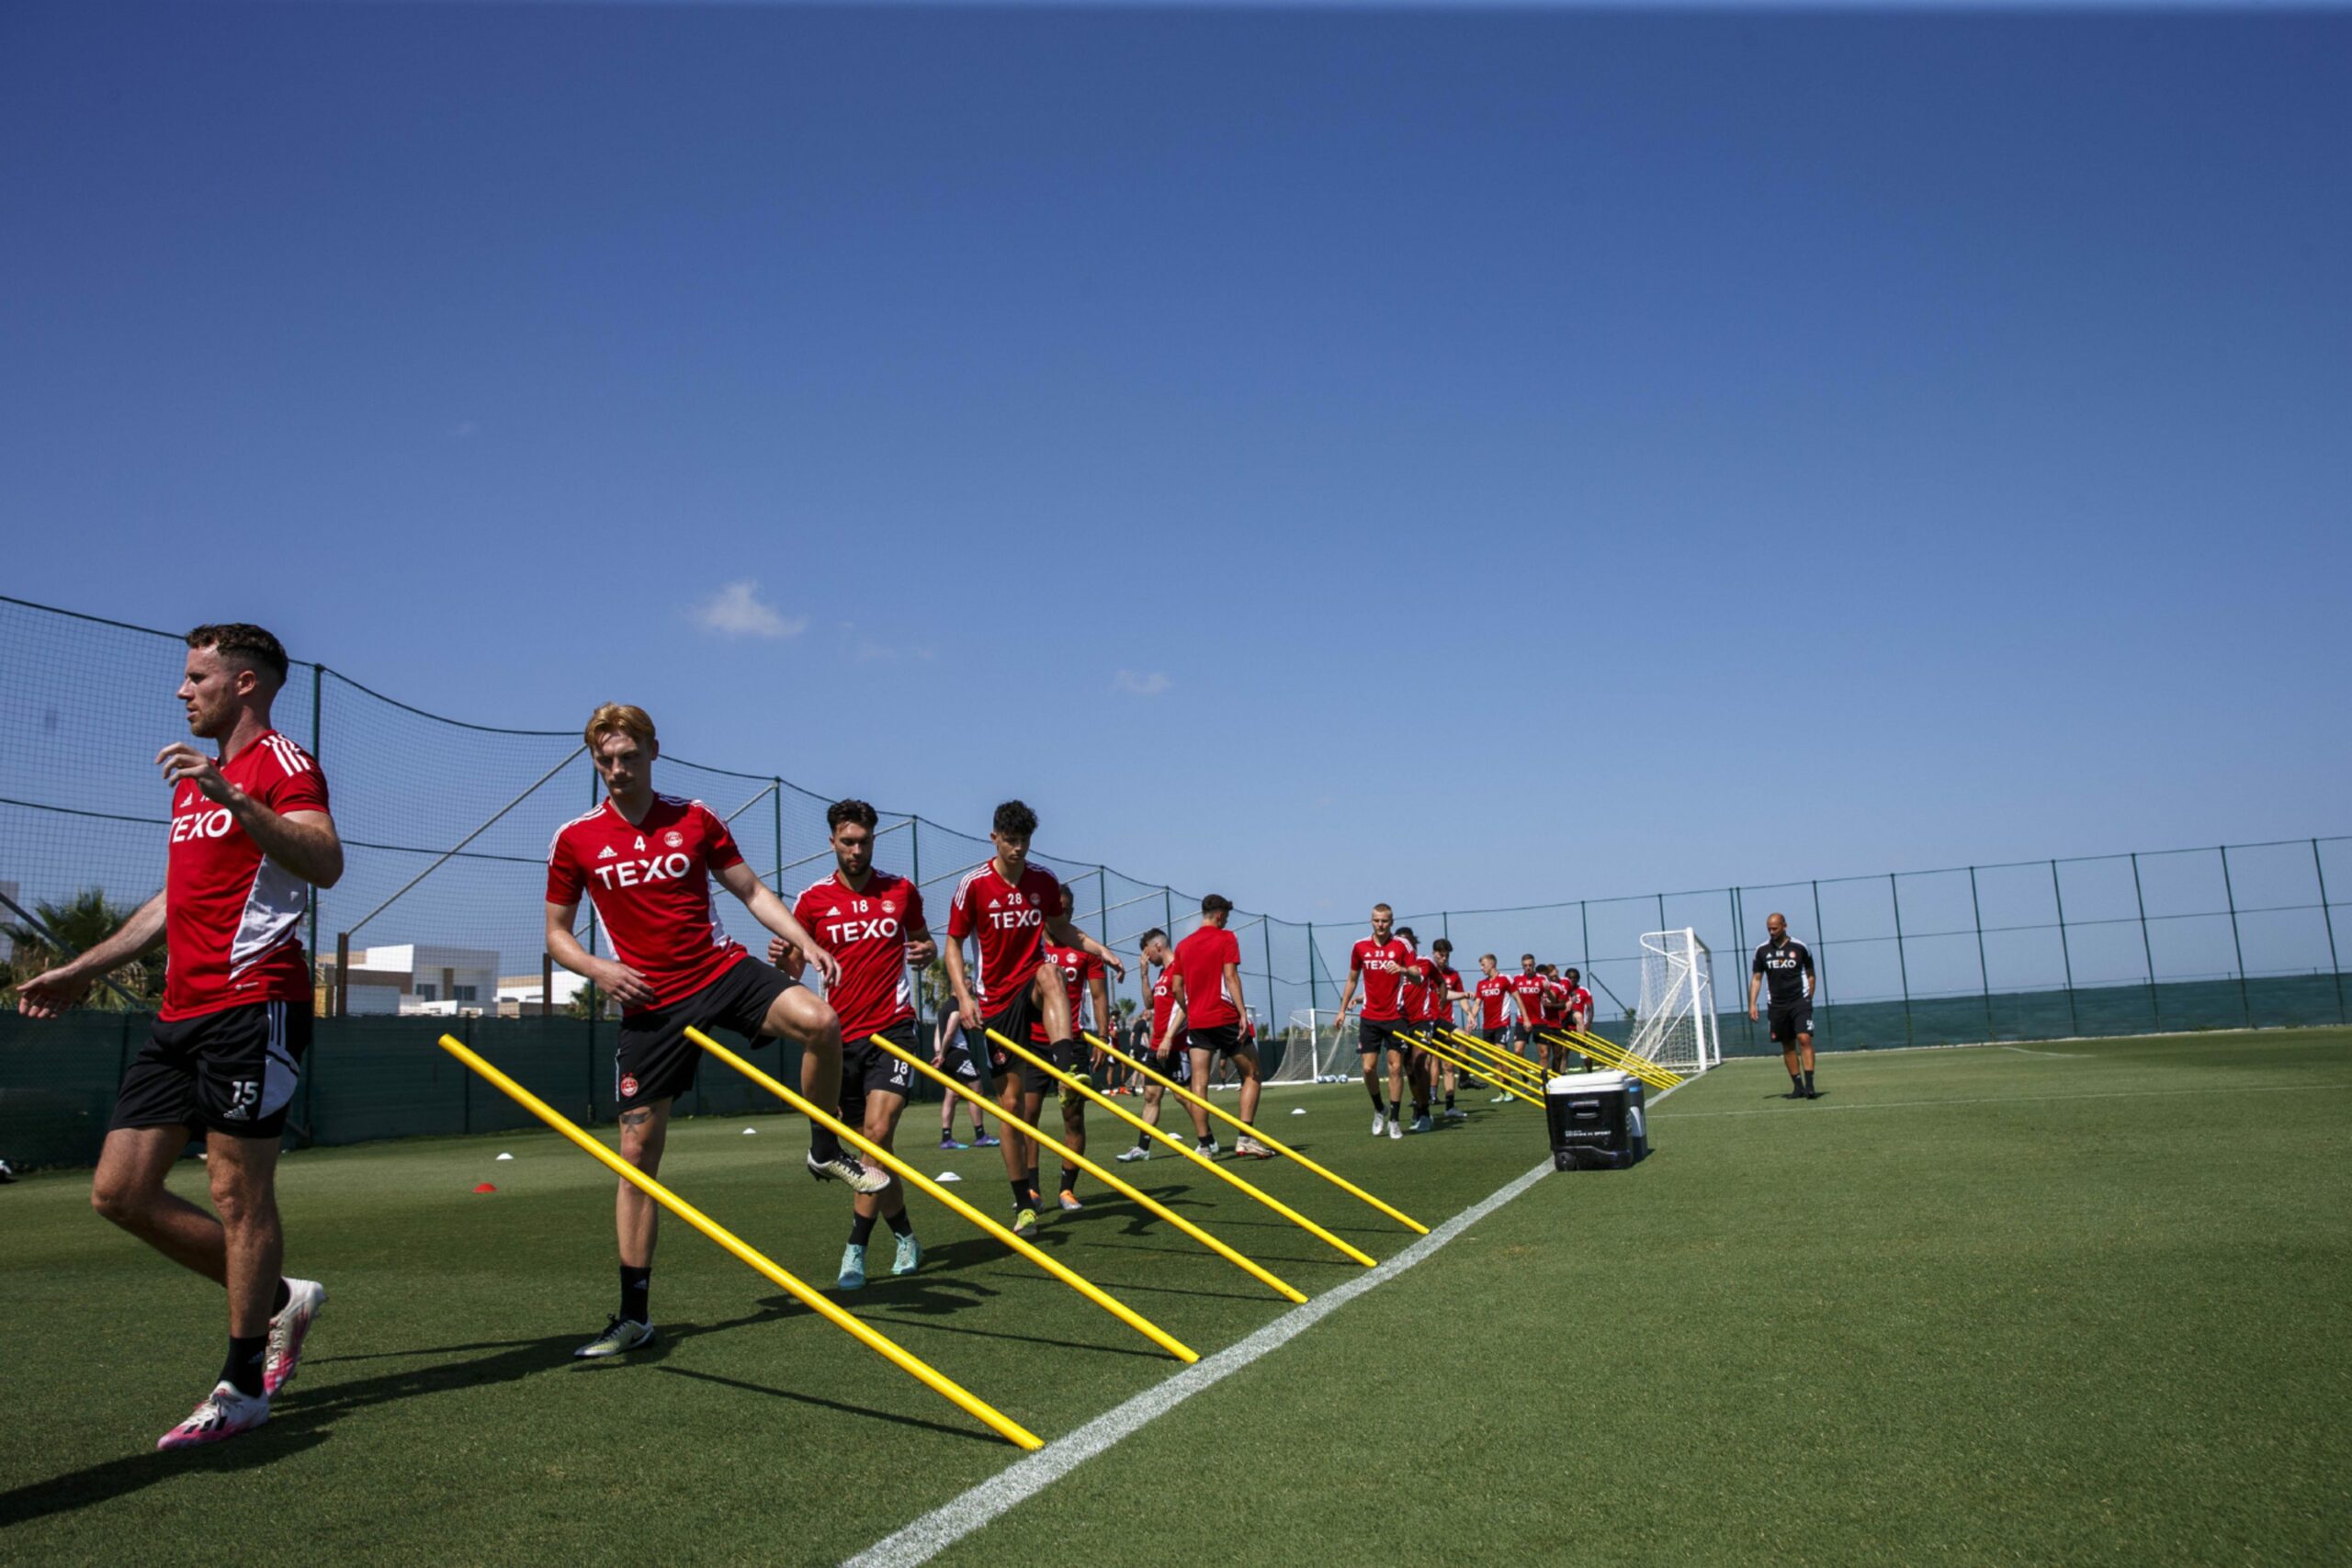 Aberdeen players are put through their paces under the sun in Spain.